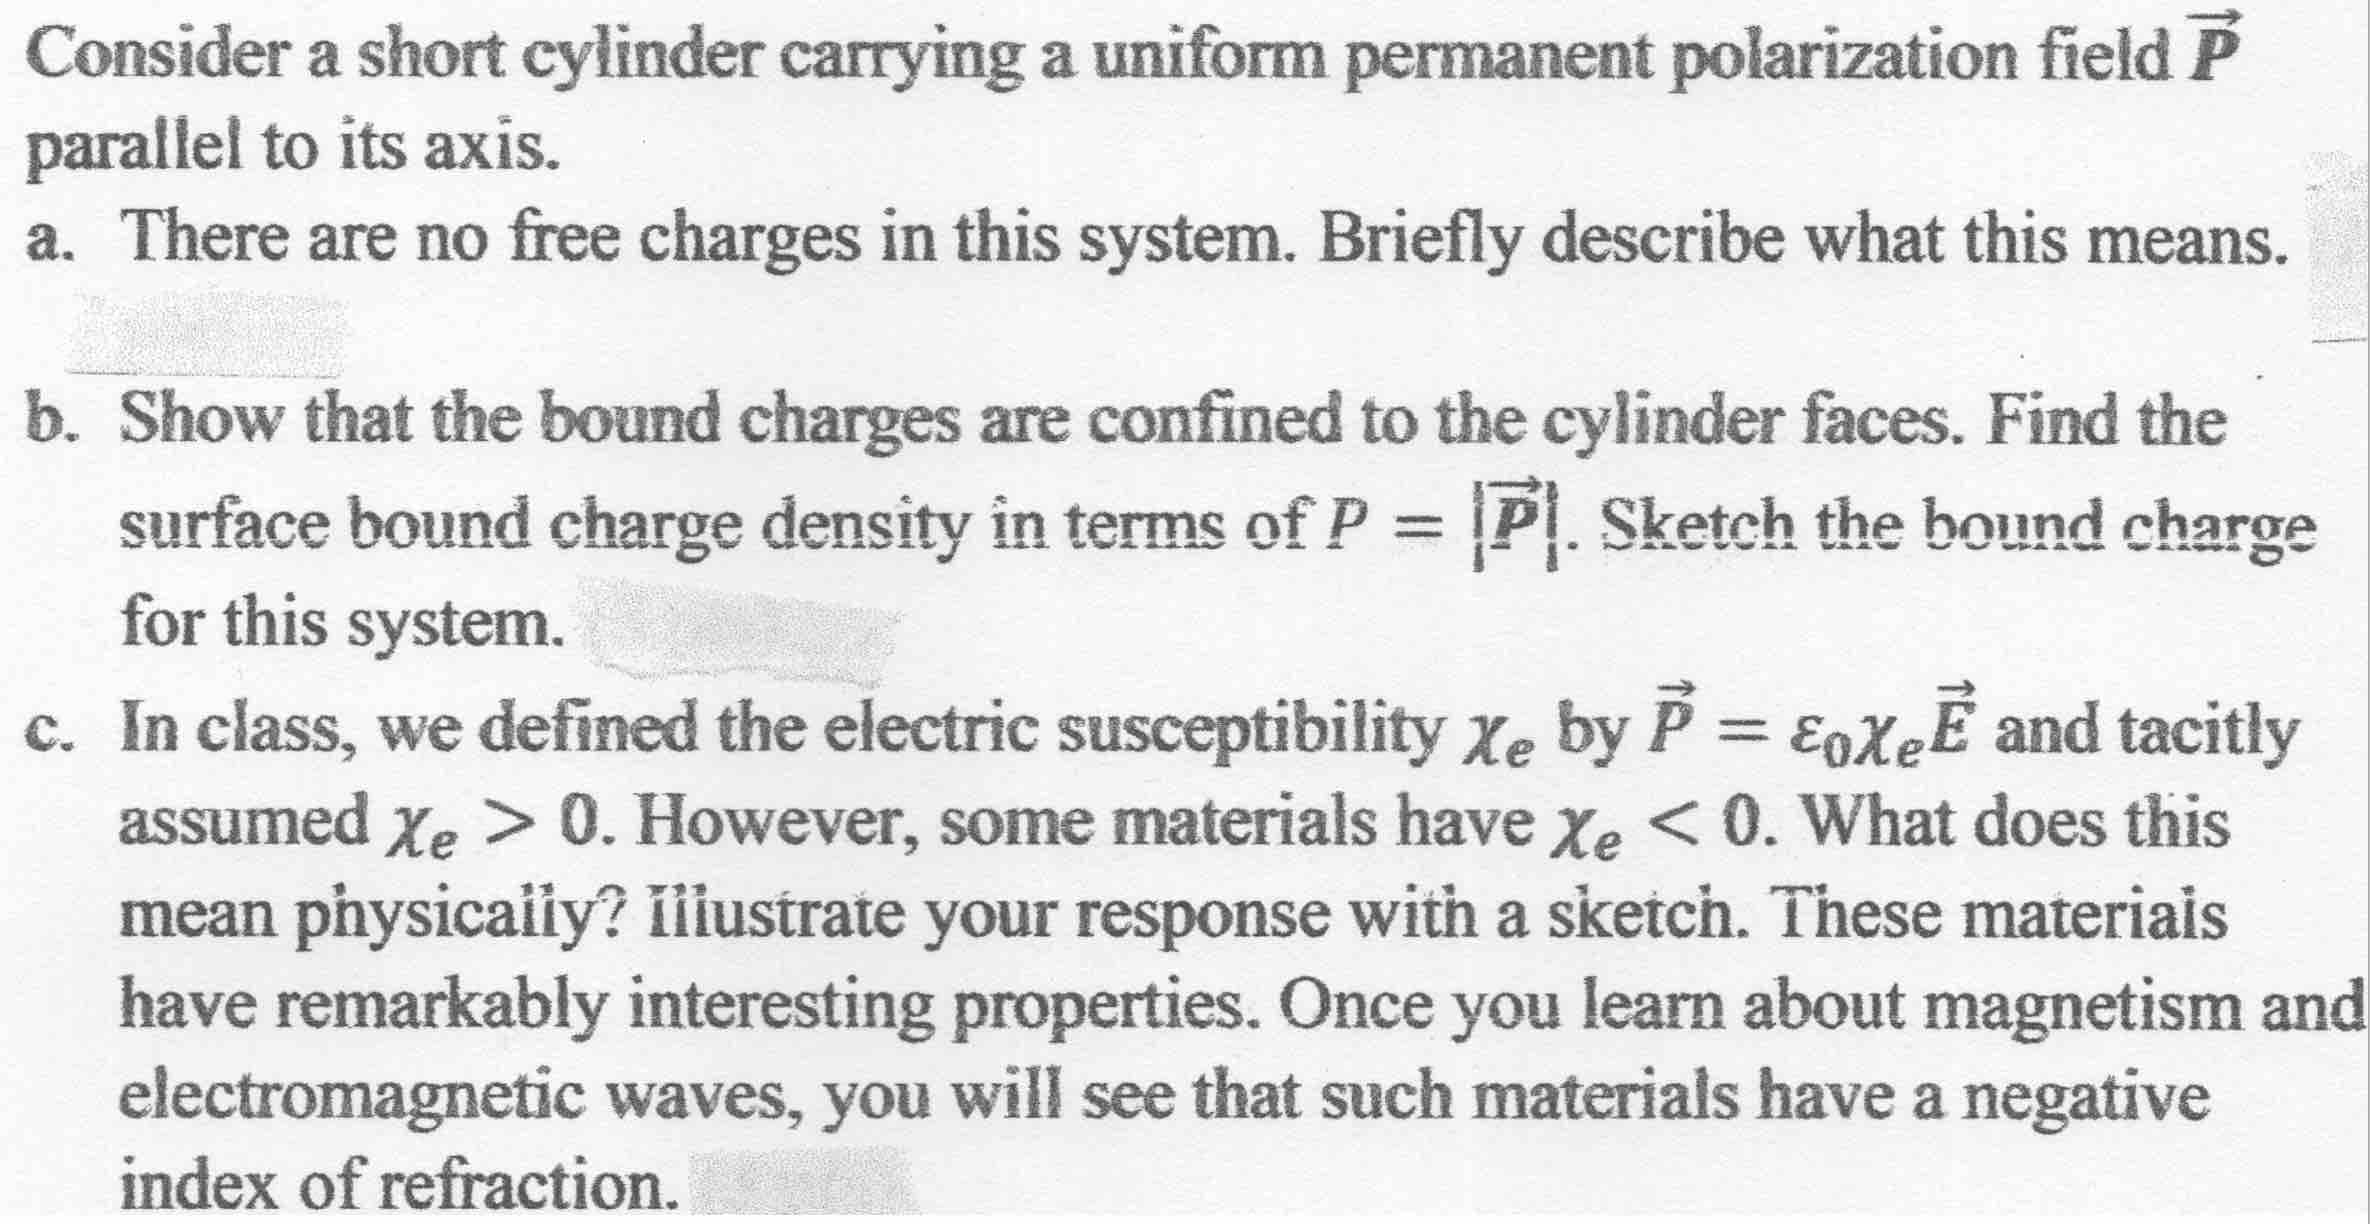 Consider a short cylinder carrying a uniform permanent polarization field P
parallel to its axis.
a. There are no free charges in this system. Briefly describe what this means.
b. Show that the bound charges are confined to the cylinder faces. Find the
surface bound charge density in terms of P = P. Sketch the bound charge
for this system.
%3D
